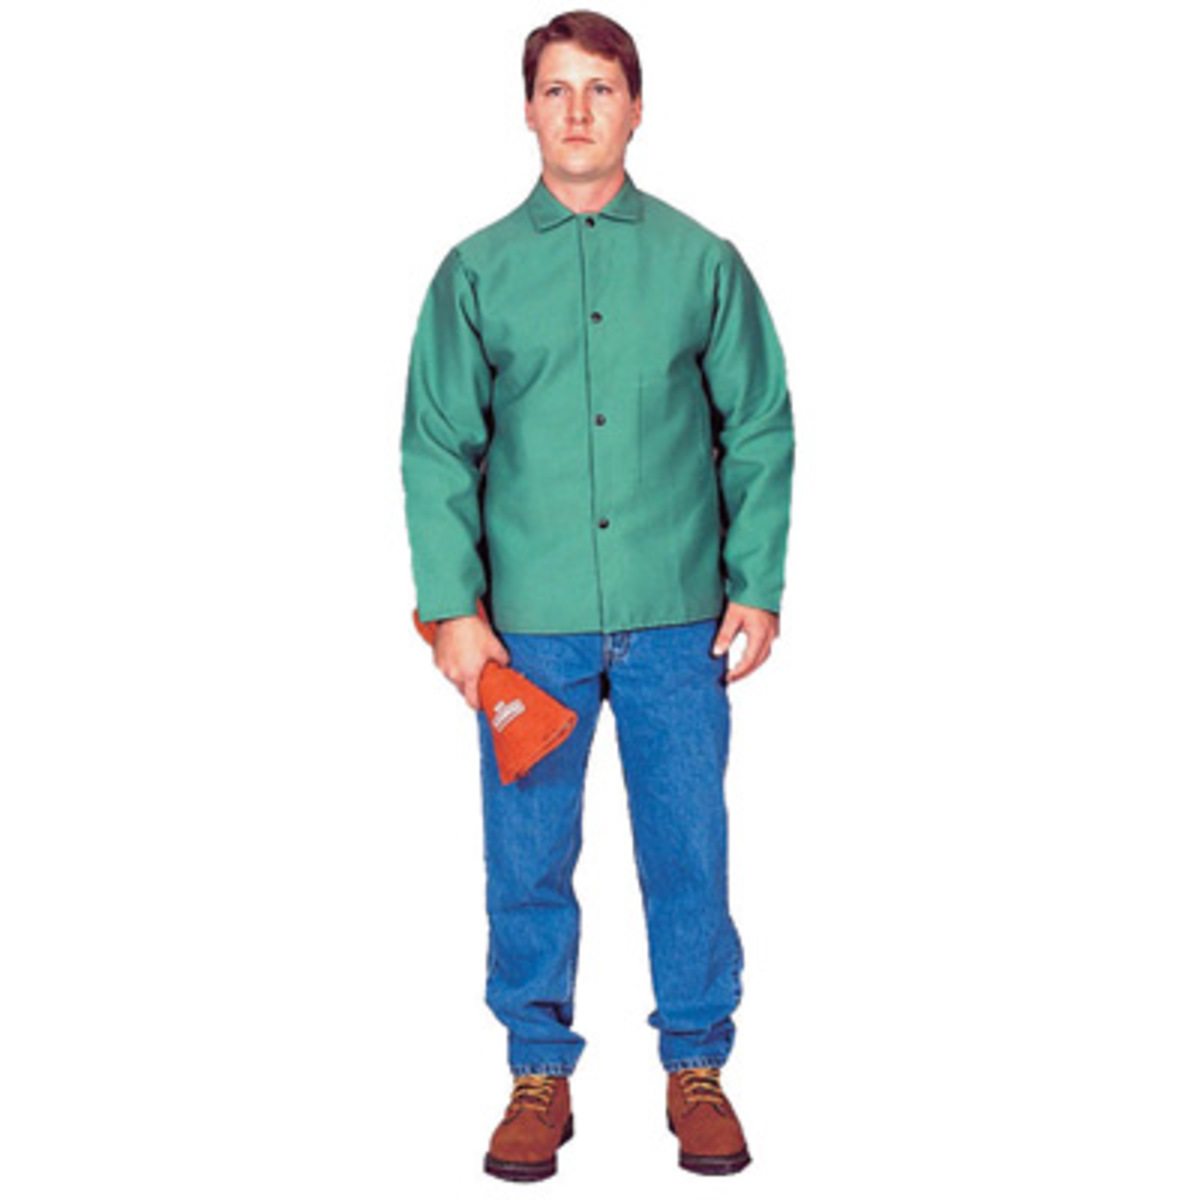 Stanco Safety Products™ Medium Green Cotton Leather Sleeves Flame Resistant Welding Jacket With Snap Closure